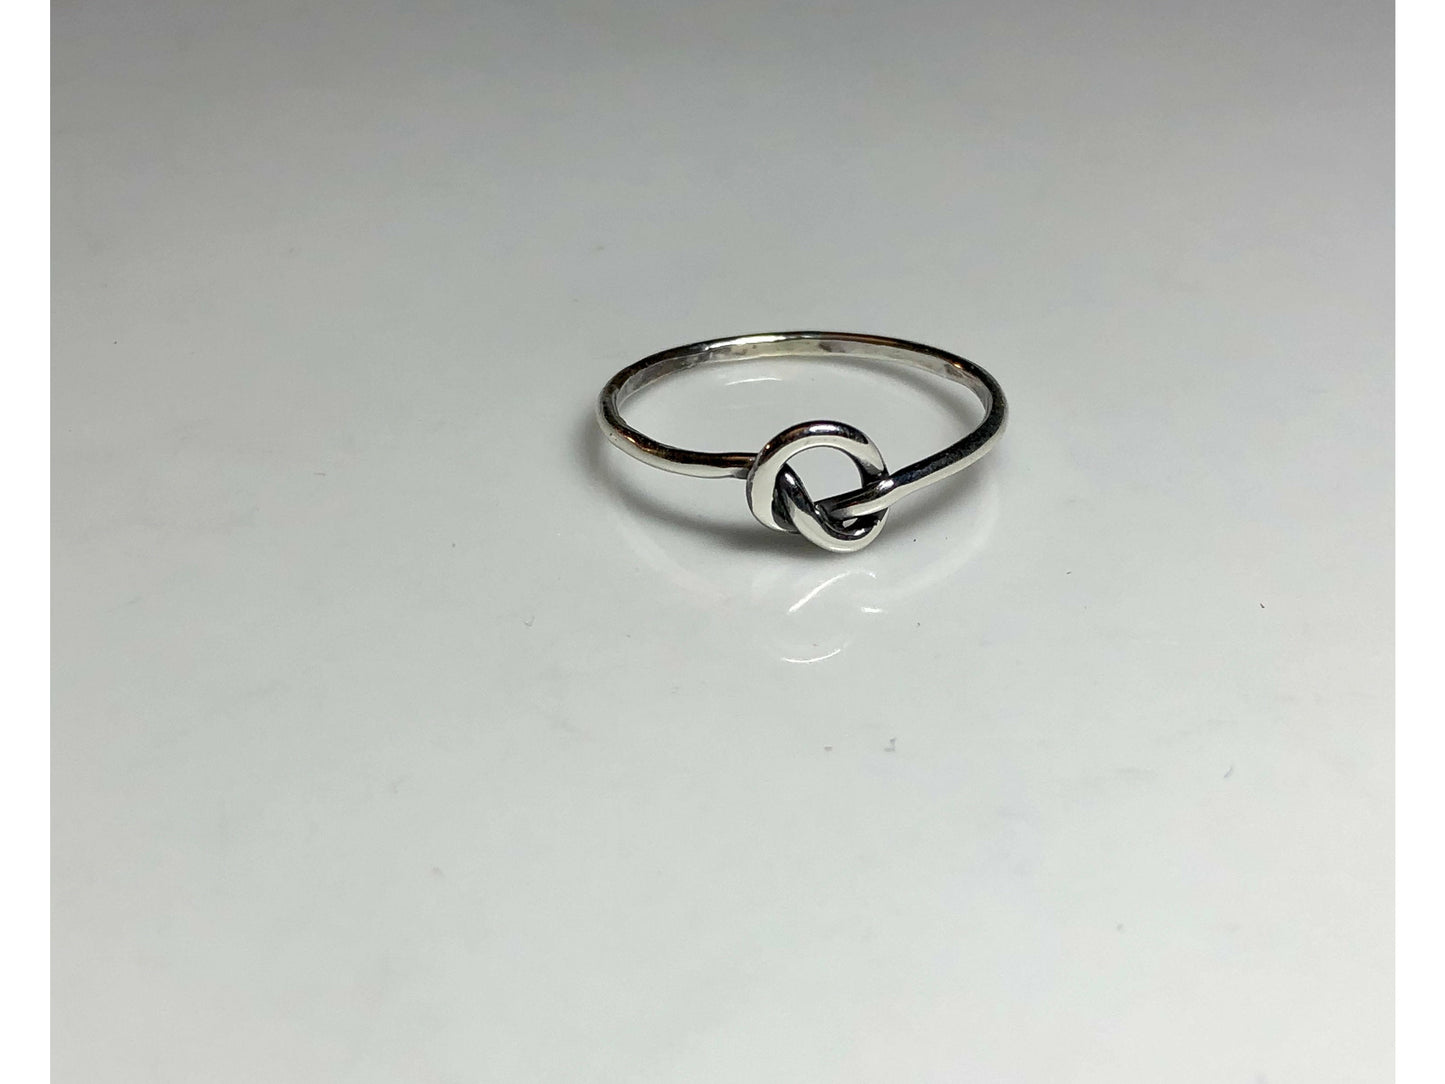 sterling-silver-knot-ring-silver-knot-ring-infinity-ring-promise-ring-gifts-for-her-dainty-ringt-bridesmaids-gift-stackable-ring-friendship